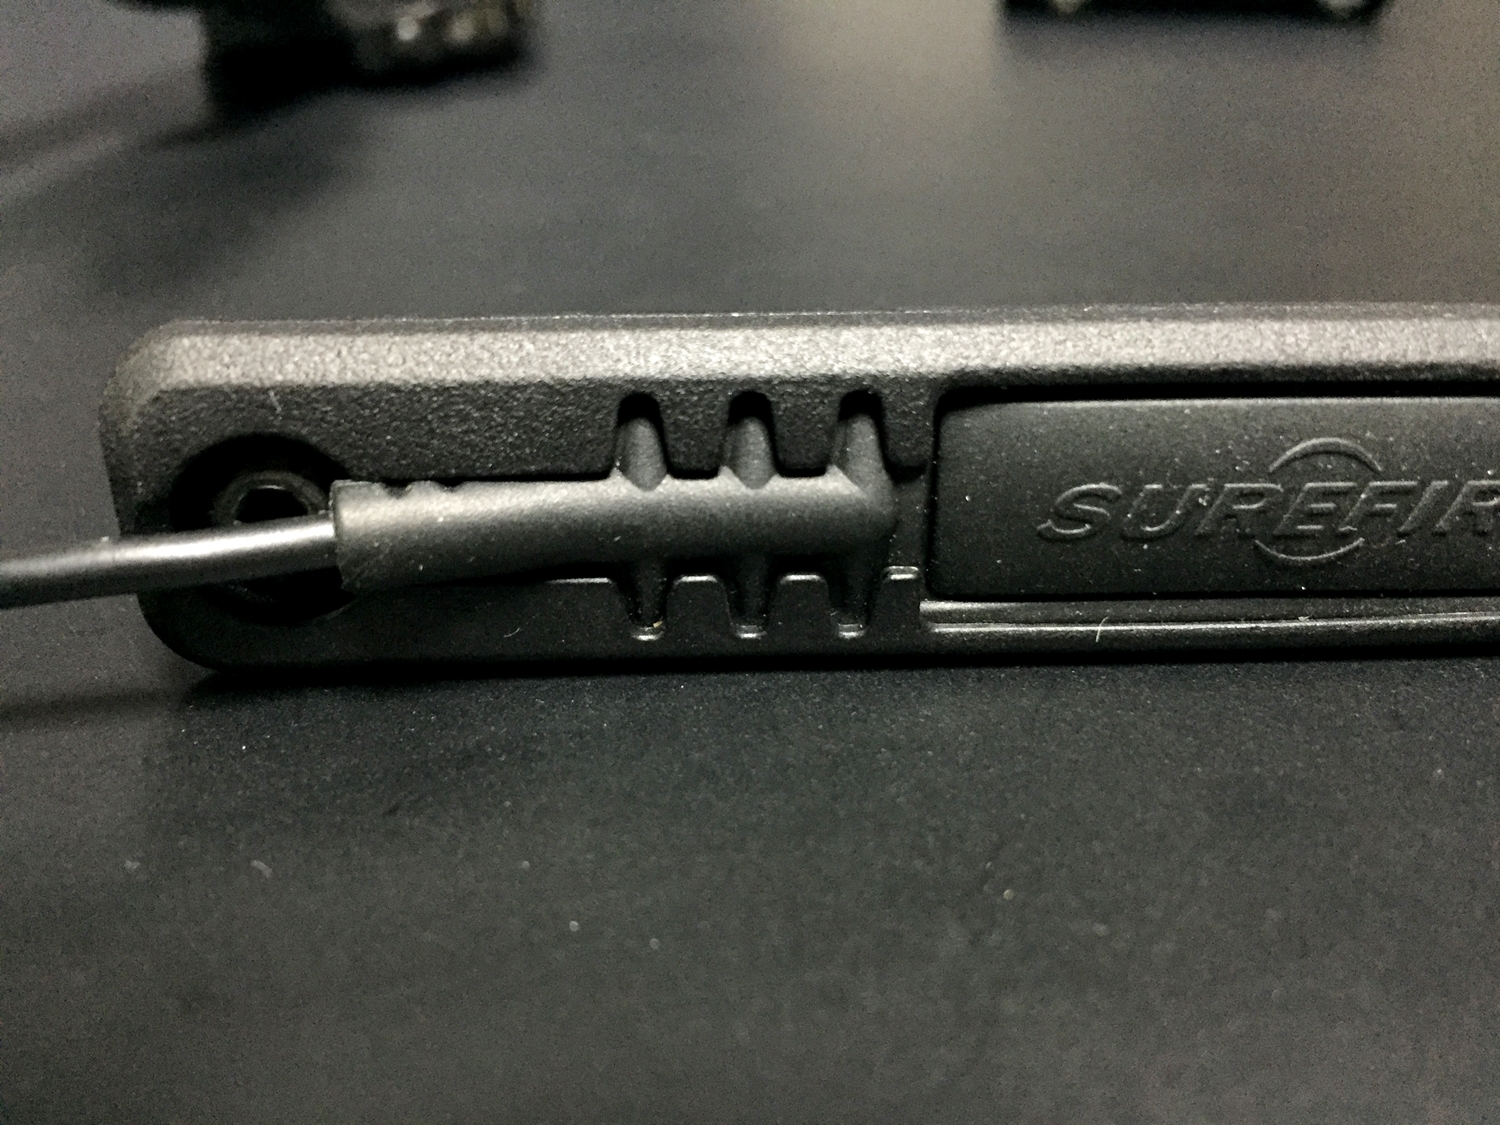 15 M-LOK MAGPUL Tape Switch Mounting Plate for Surefire ST Polymer MADE IN USA マグプル 実物 本家 テープ リモート スイッチ